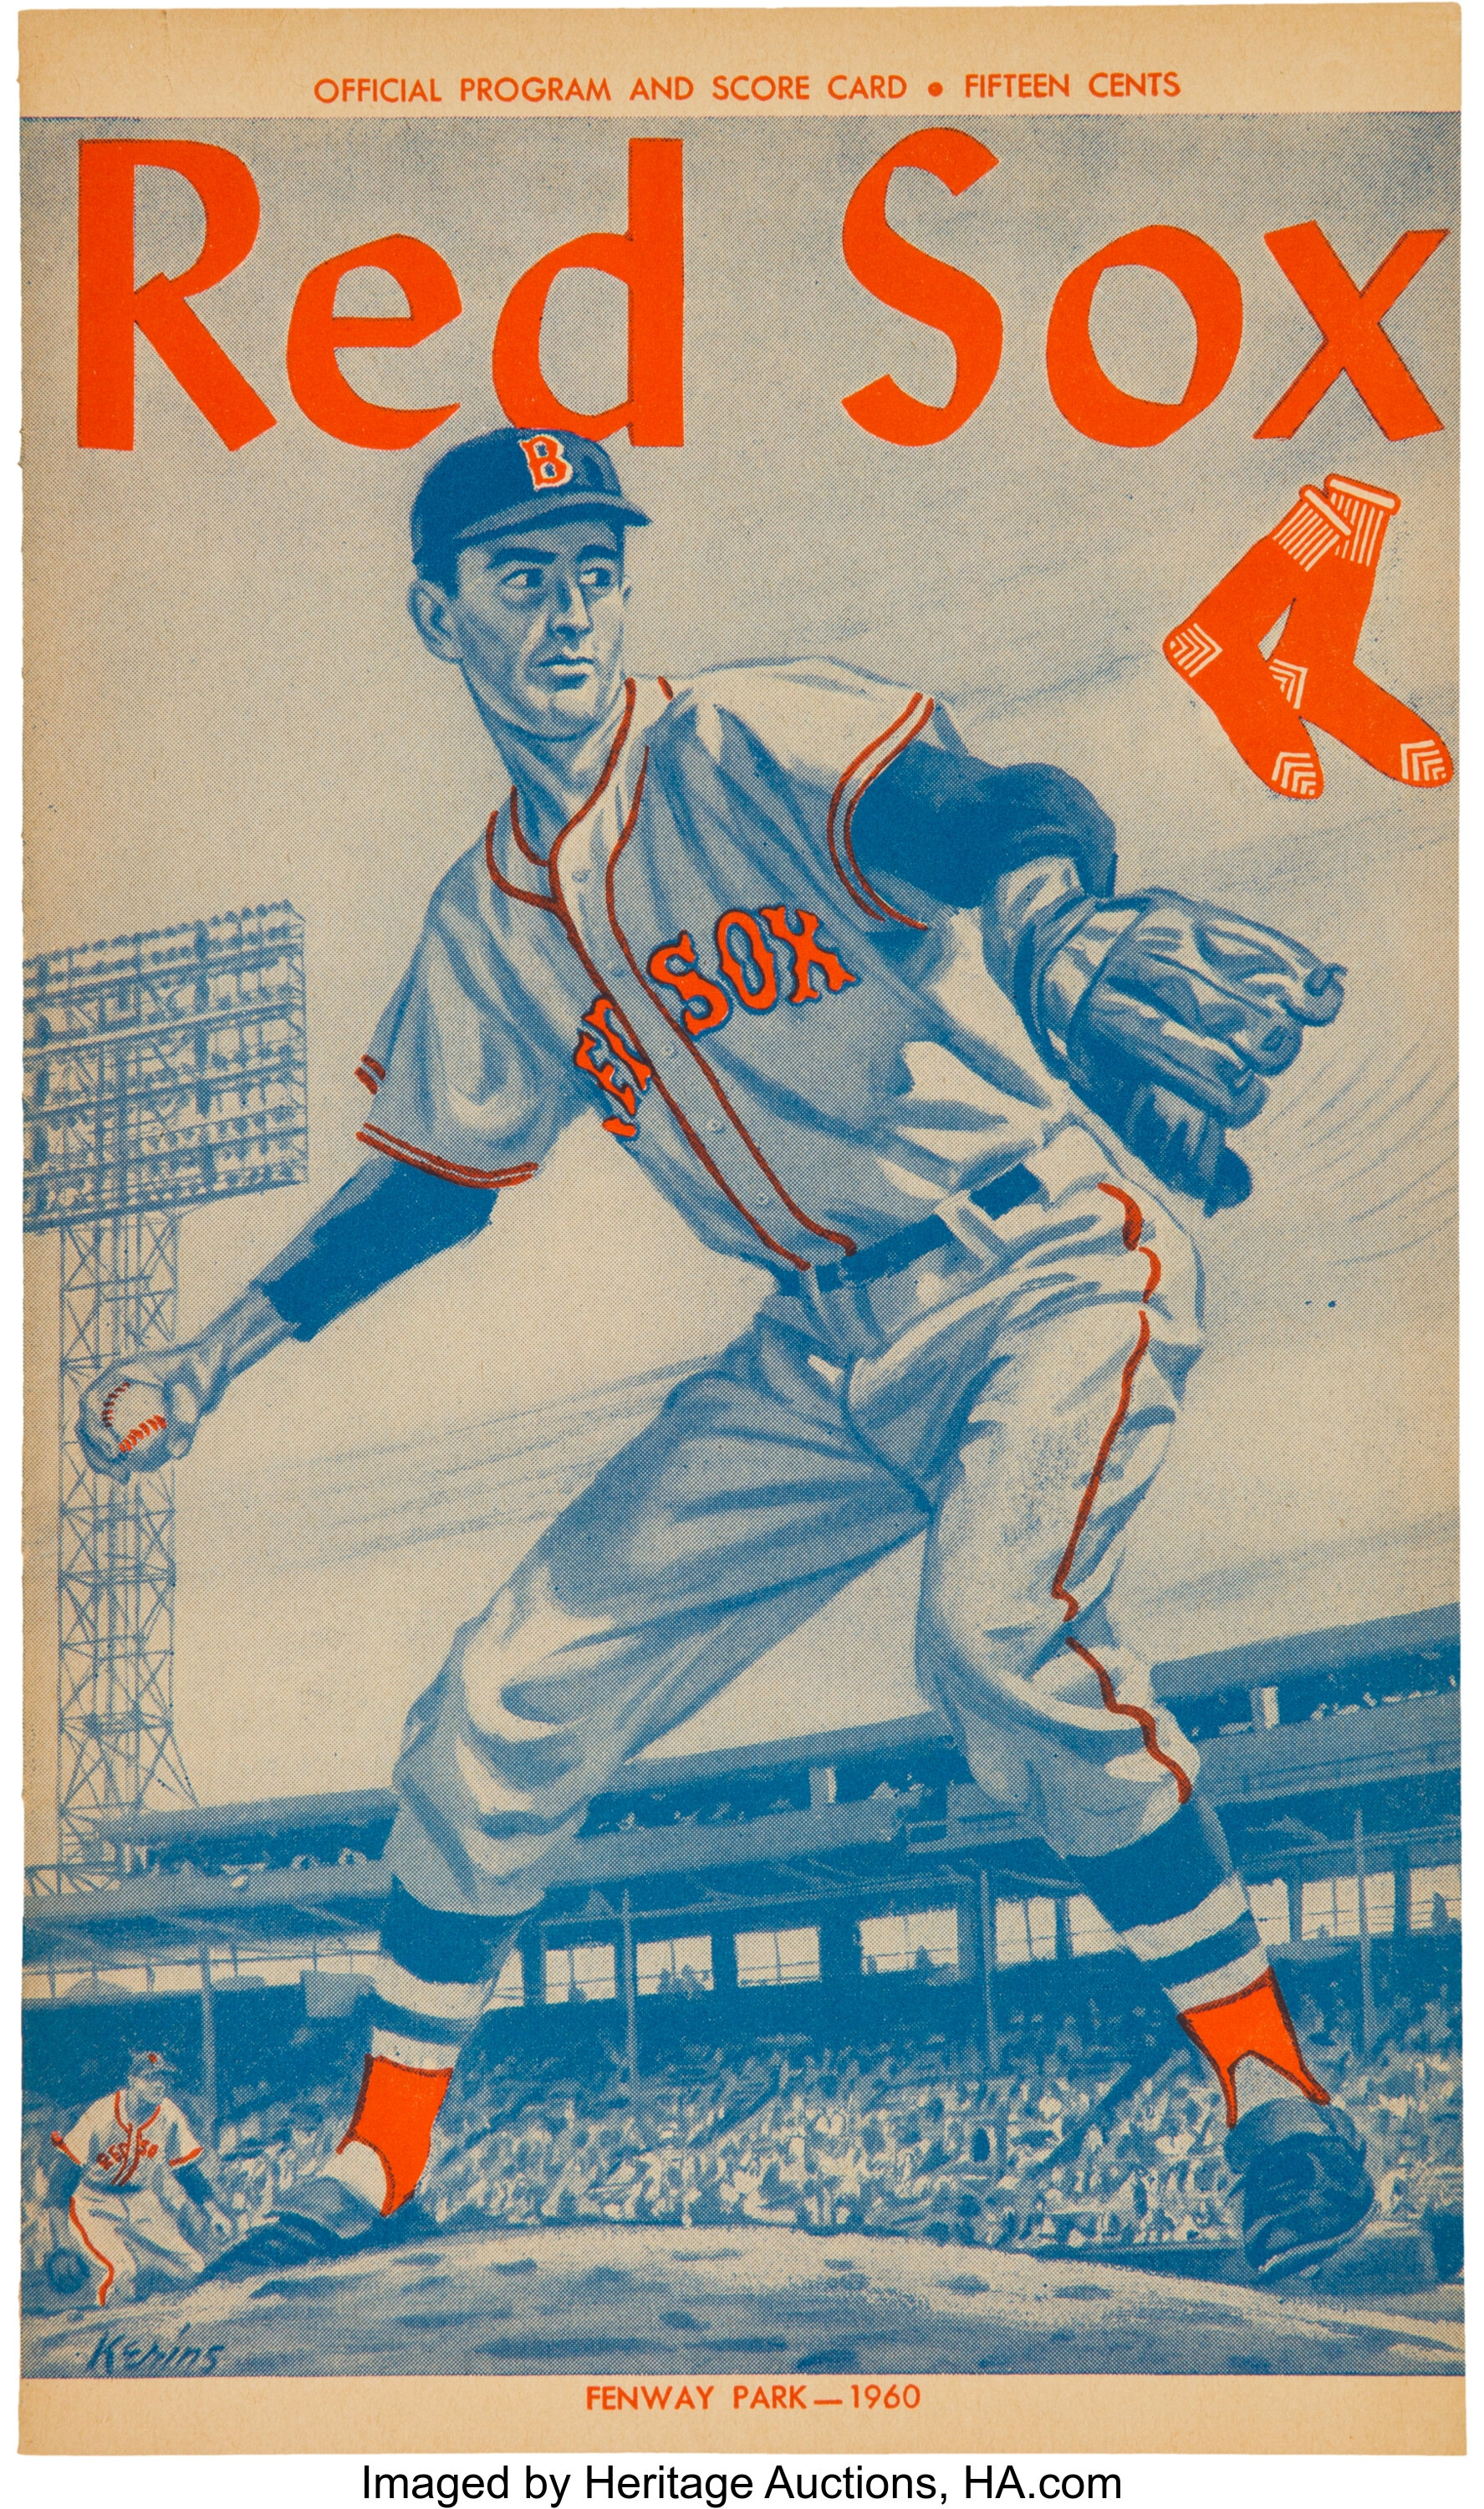 Boston Red Sox Fenway Park Ted Williams sports art and photos